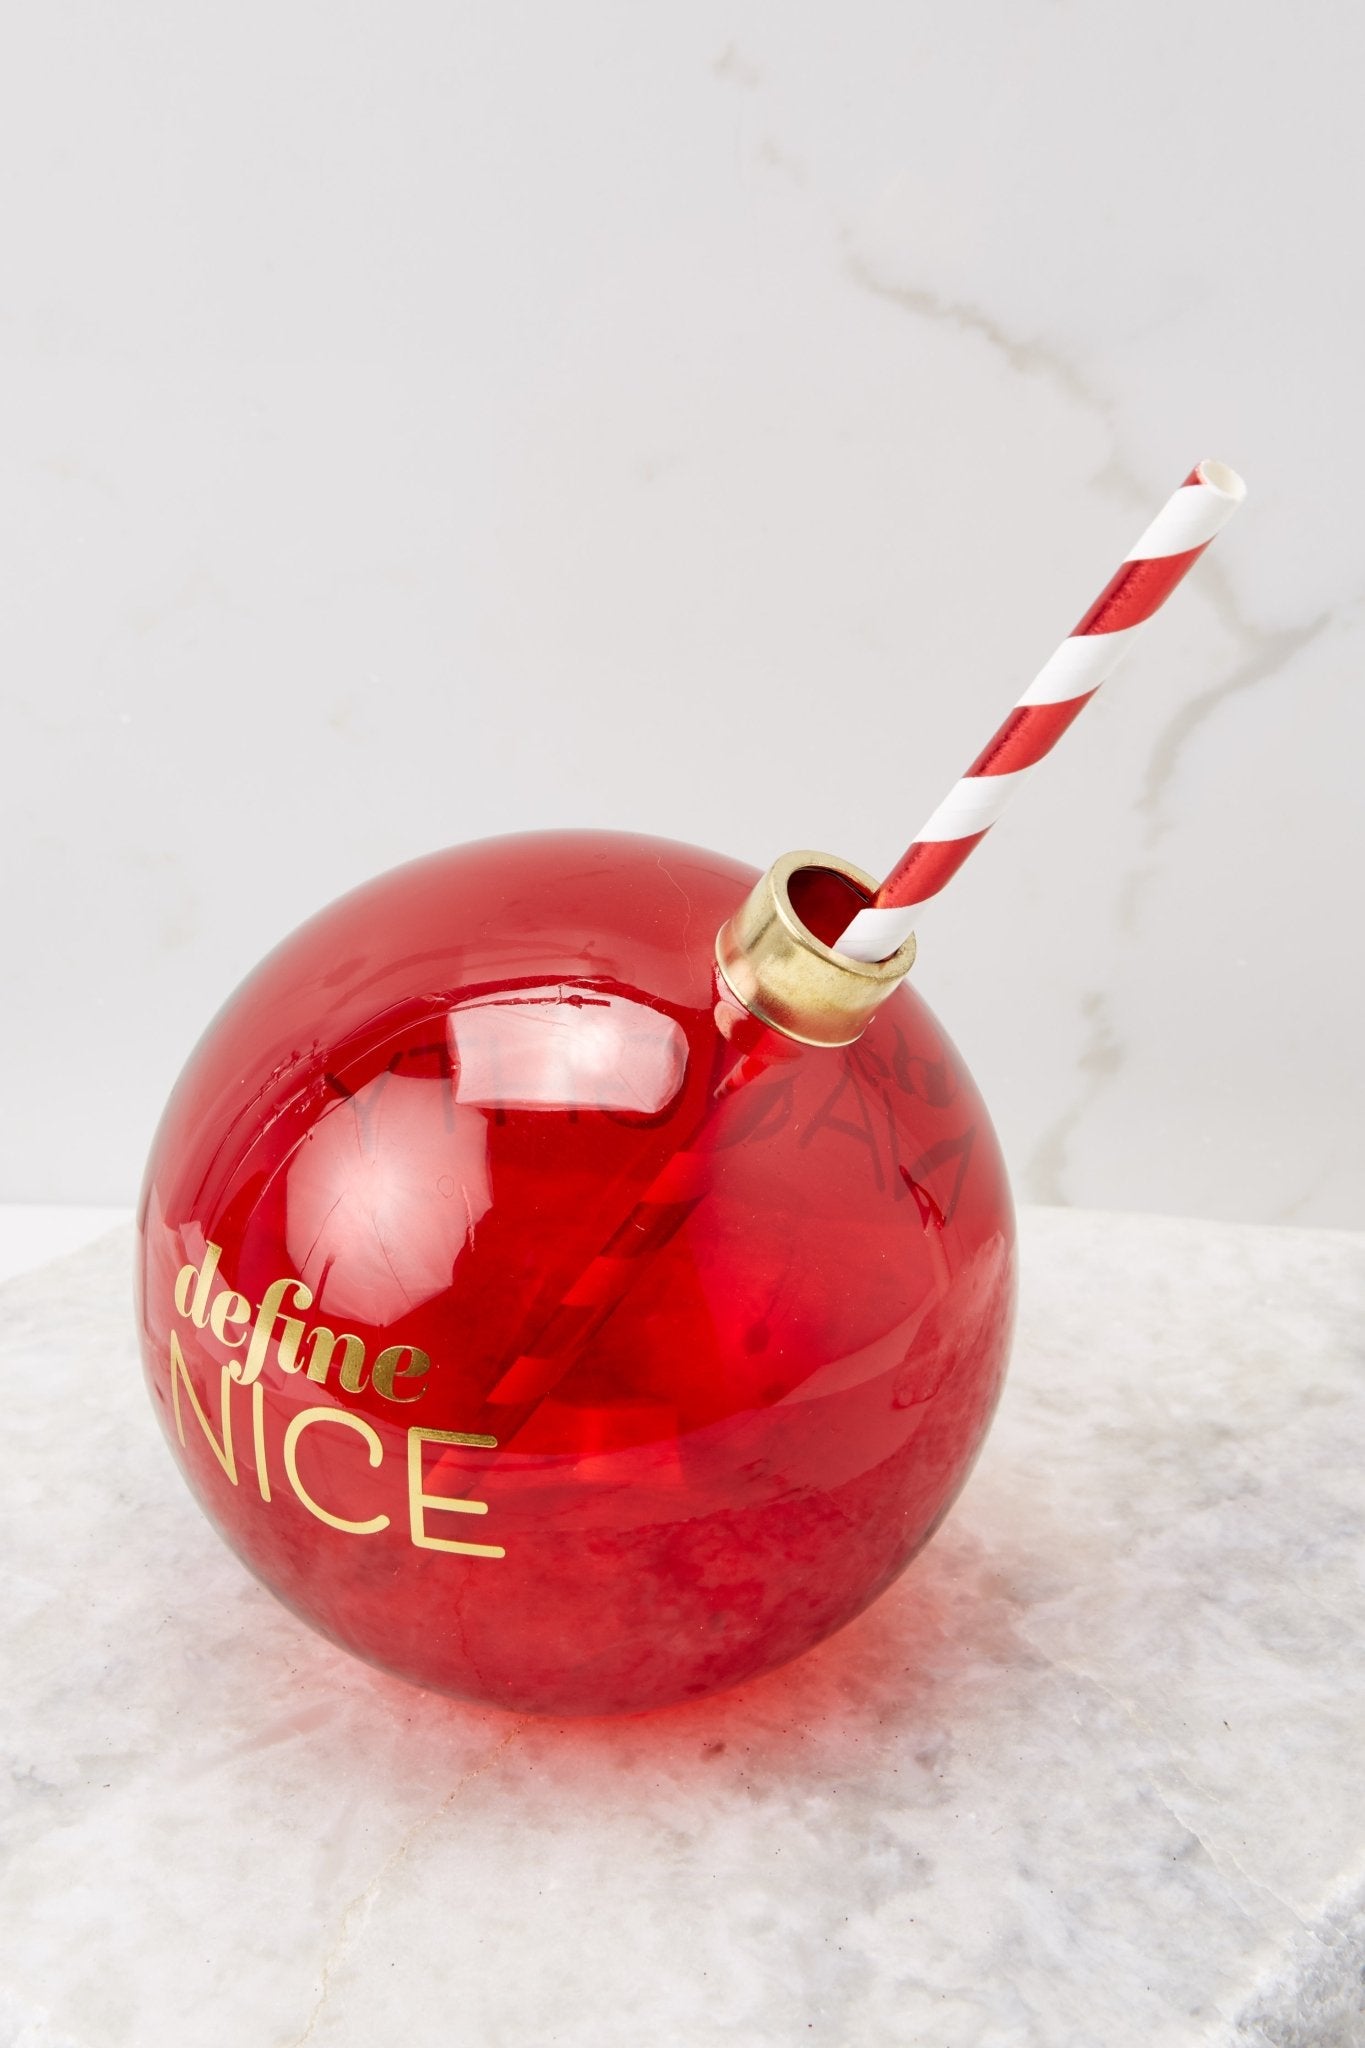 12oz. Red Christmas Ornament Cup w/ Straw - 1ct. - Party Adventure